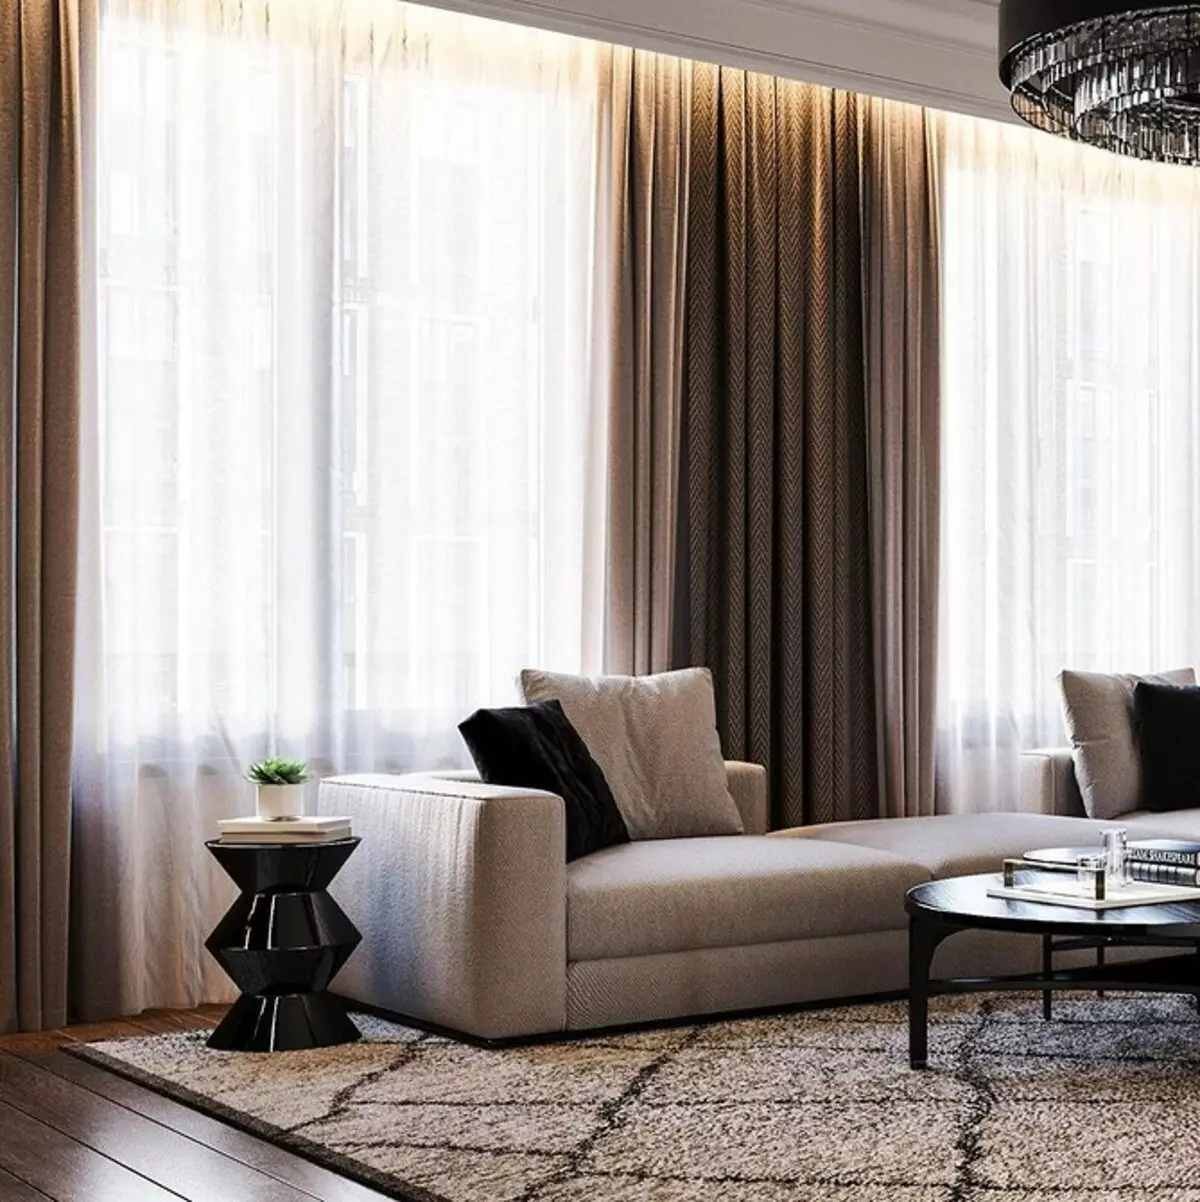 Fashionable curtains in the living room in modern style (52 photos) 6680_43